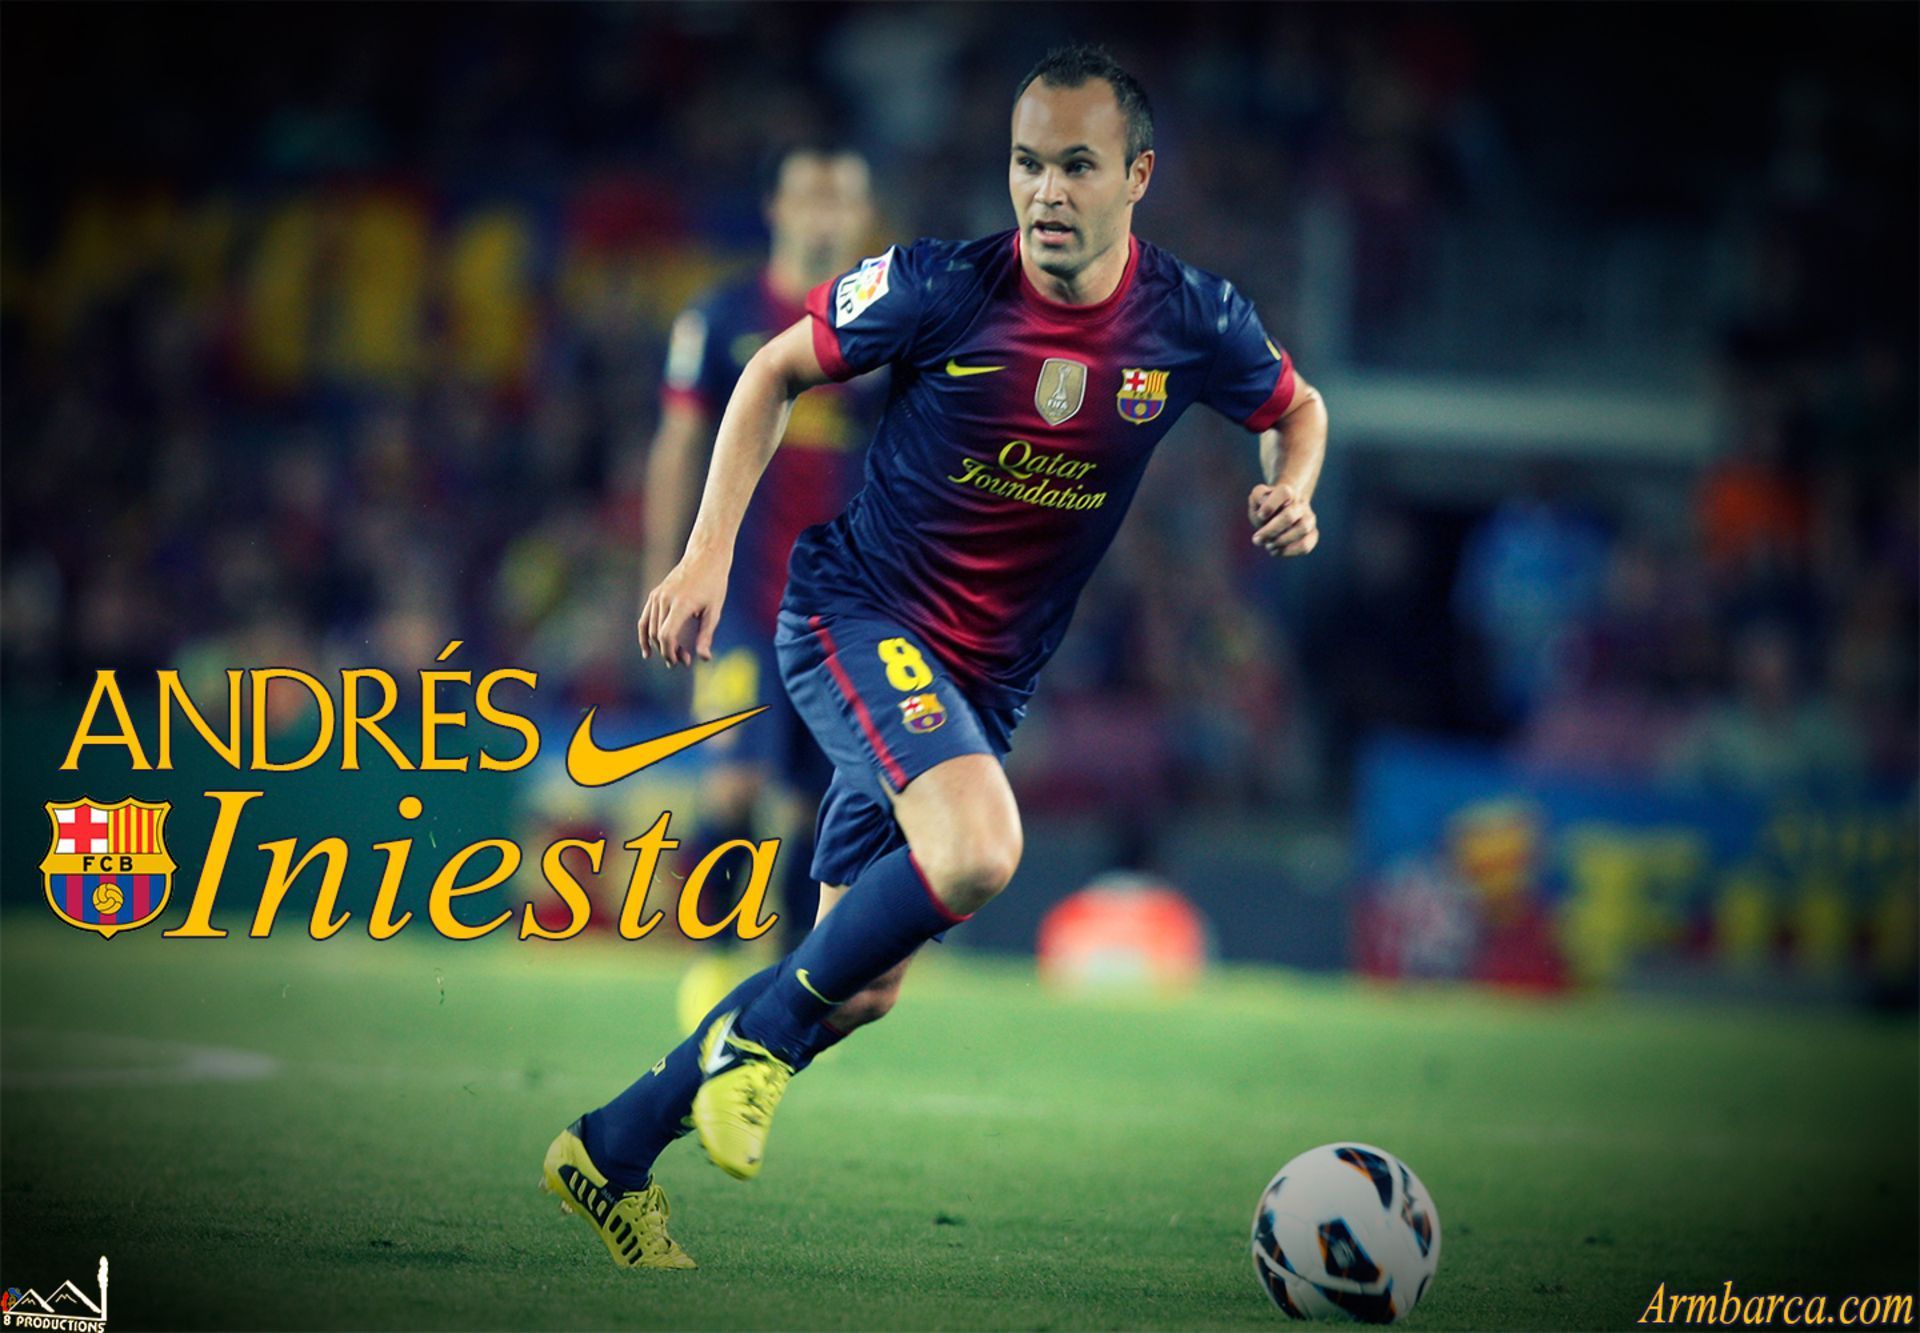 The player of Barcelona Andres Iniesta wallpapers and images